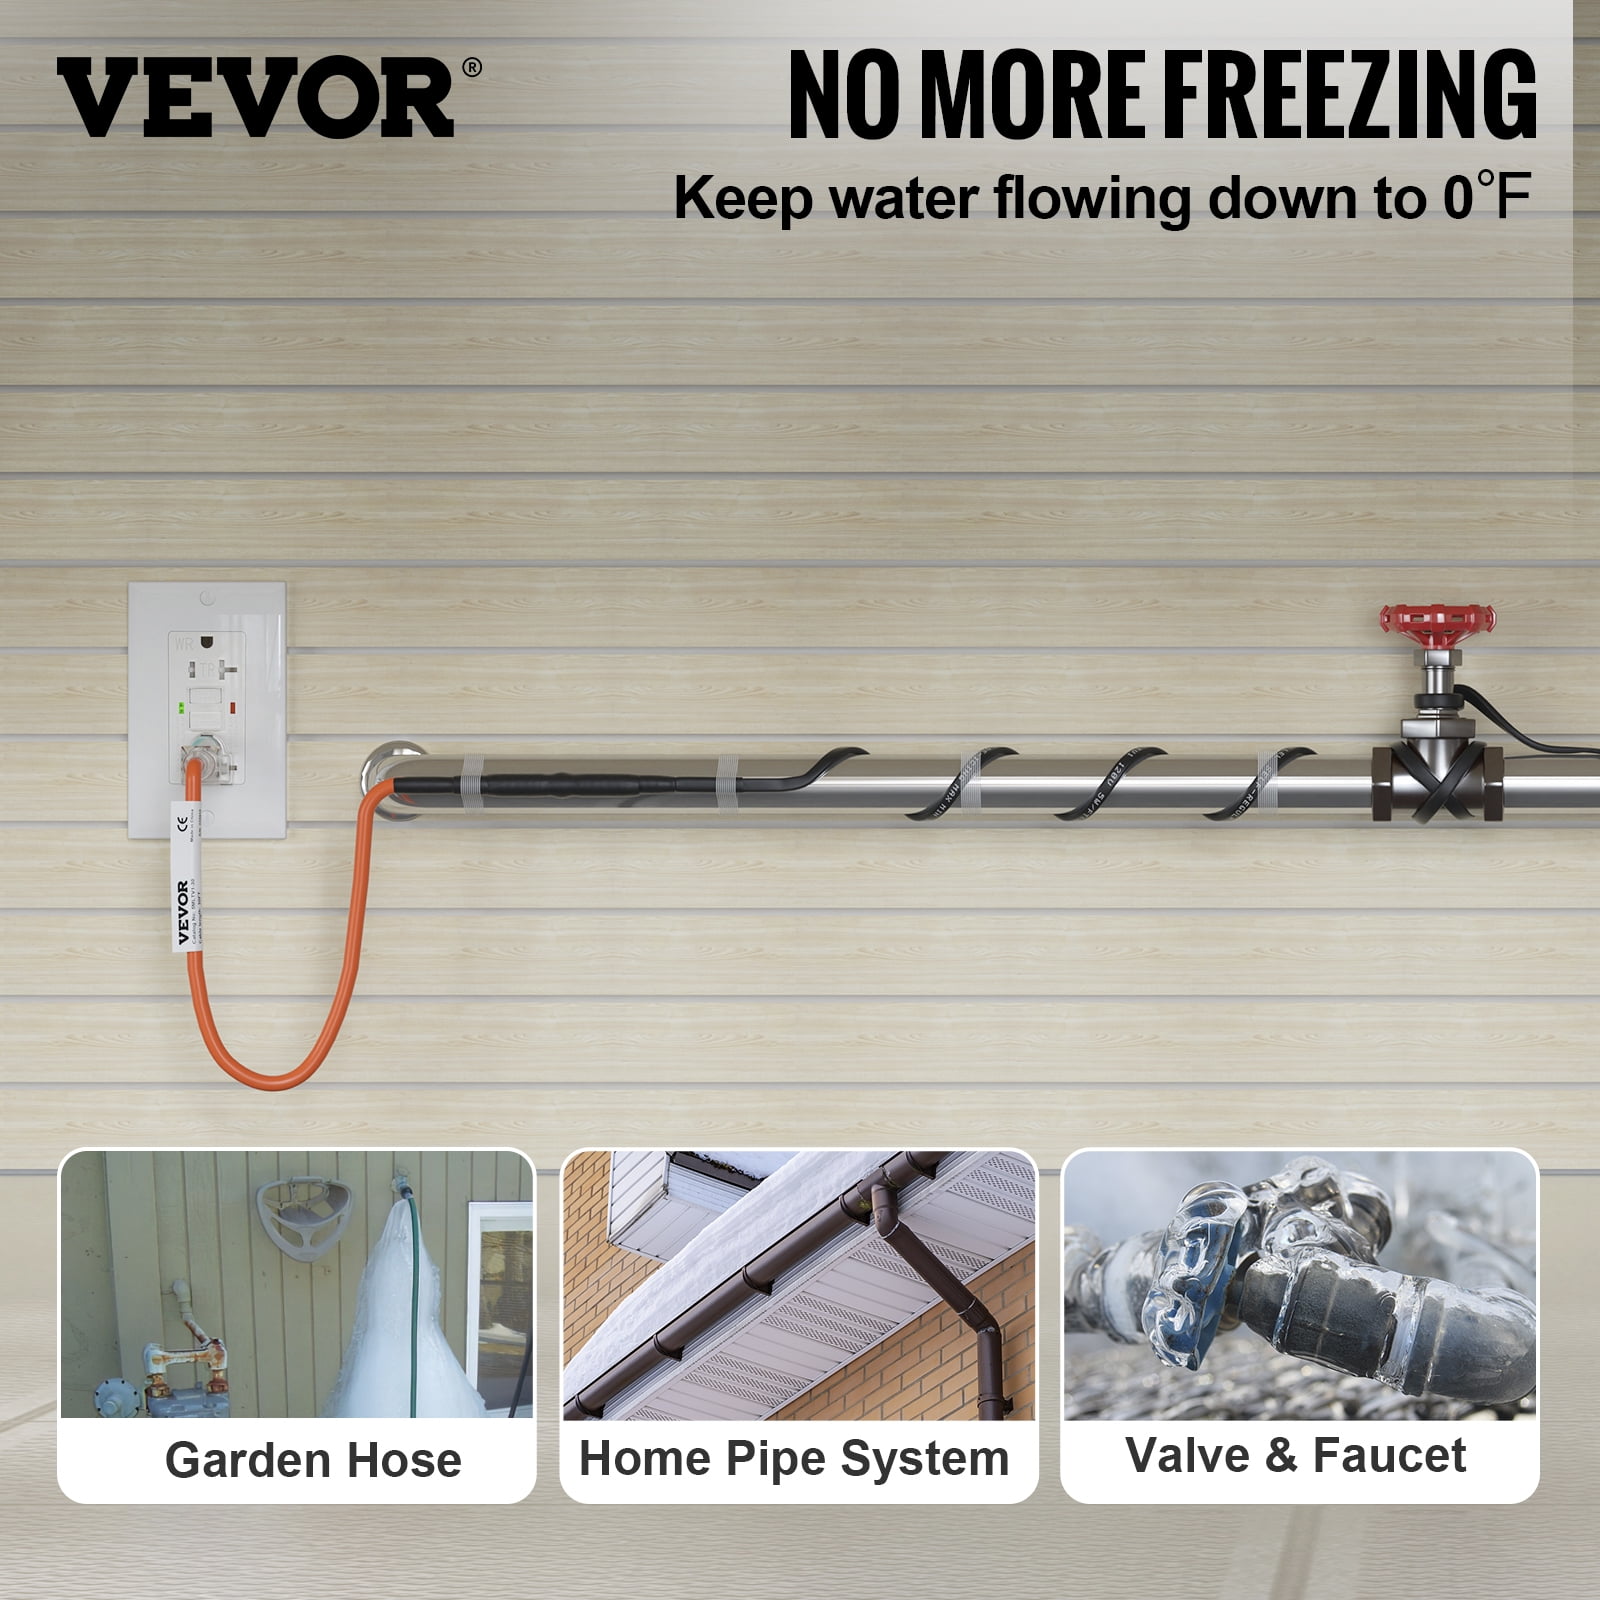 VEVOR Self-Regulating Pipe Heating Cable, 120-Feet 5W/ft Heat Tape for pipes, Roof Snow Melting De-Icing, Gutter and Pipe Freez